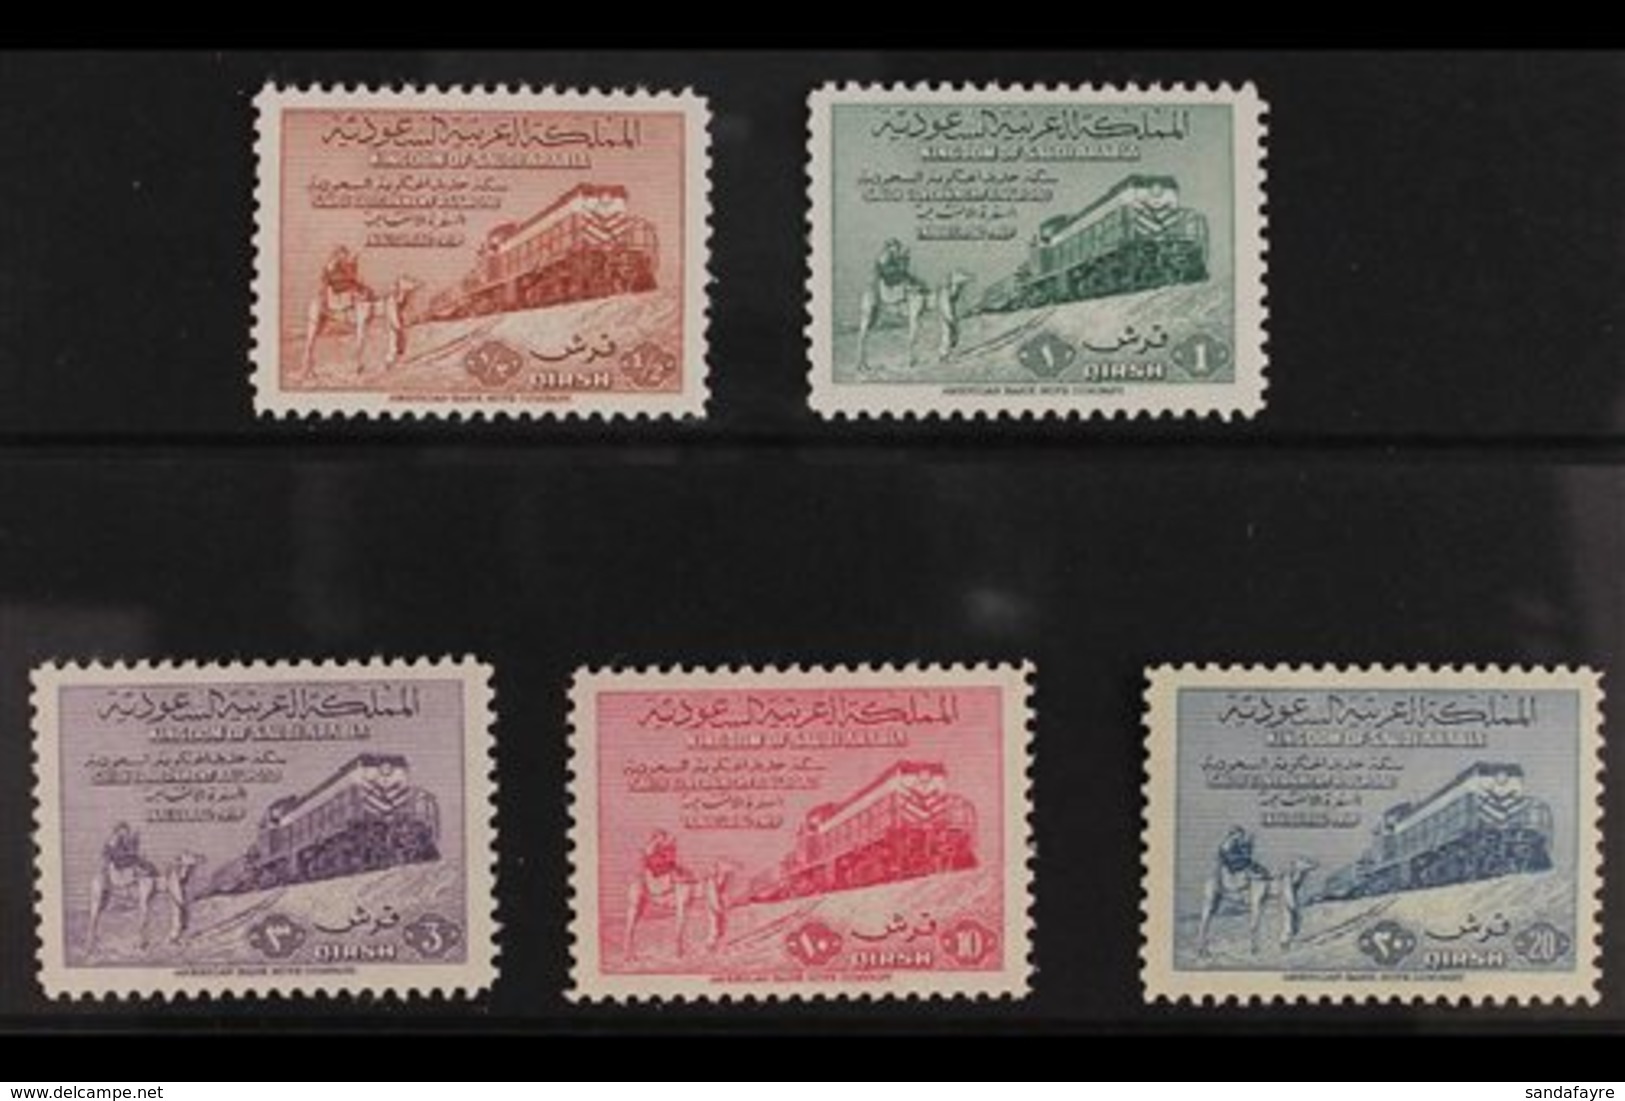 1952 Inauguration Of Dammam-Riyadh Railway Complete Set, SG 372/376, Never Hinged Mint. (5 Stamps) For More Images, Plea - Saudi-Arabien